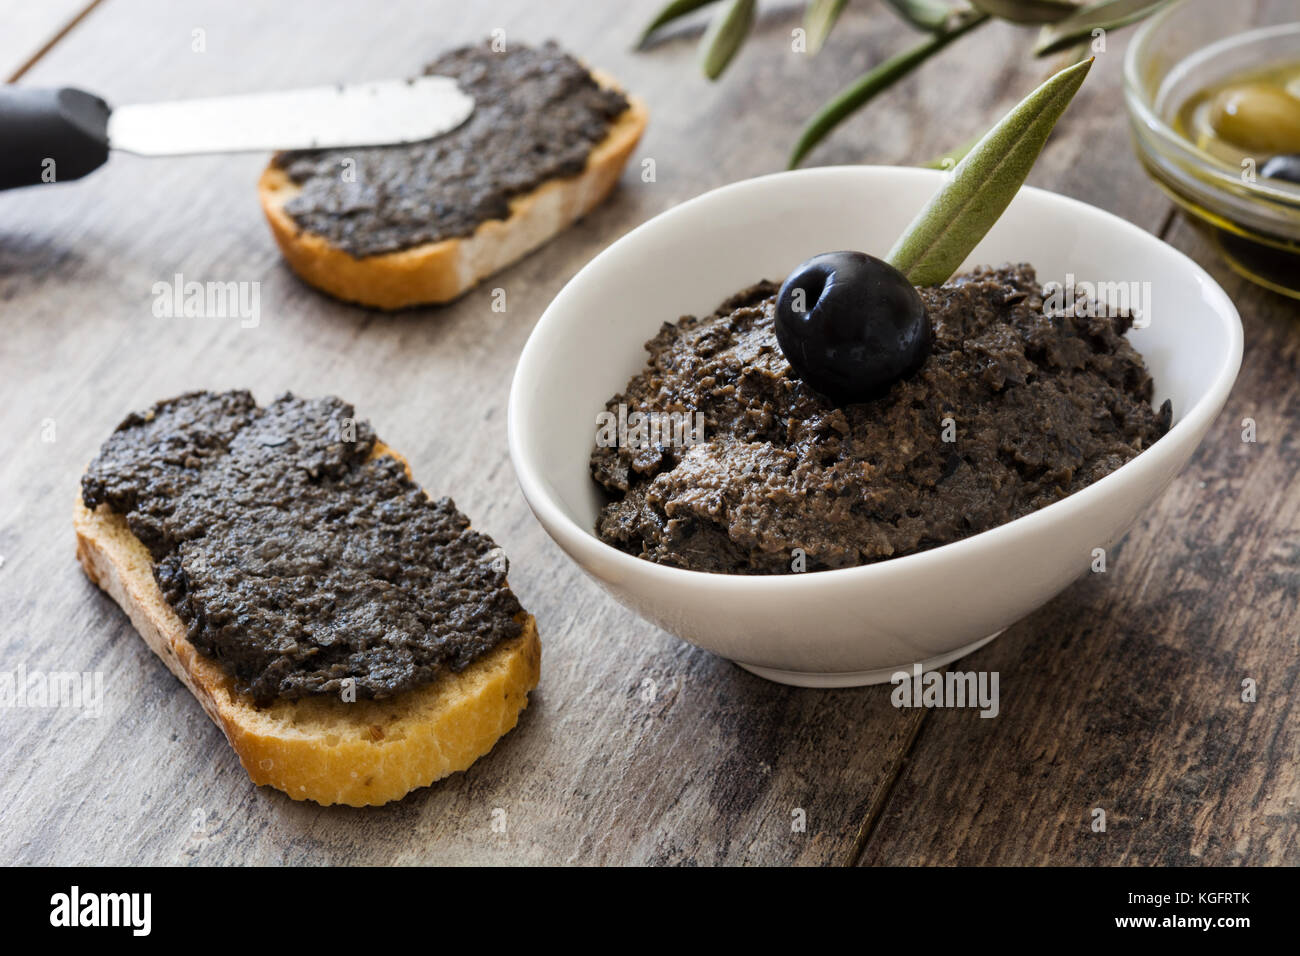 Black olive tapenade with anchovies, garlic and olive oil on wooden ...